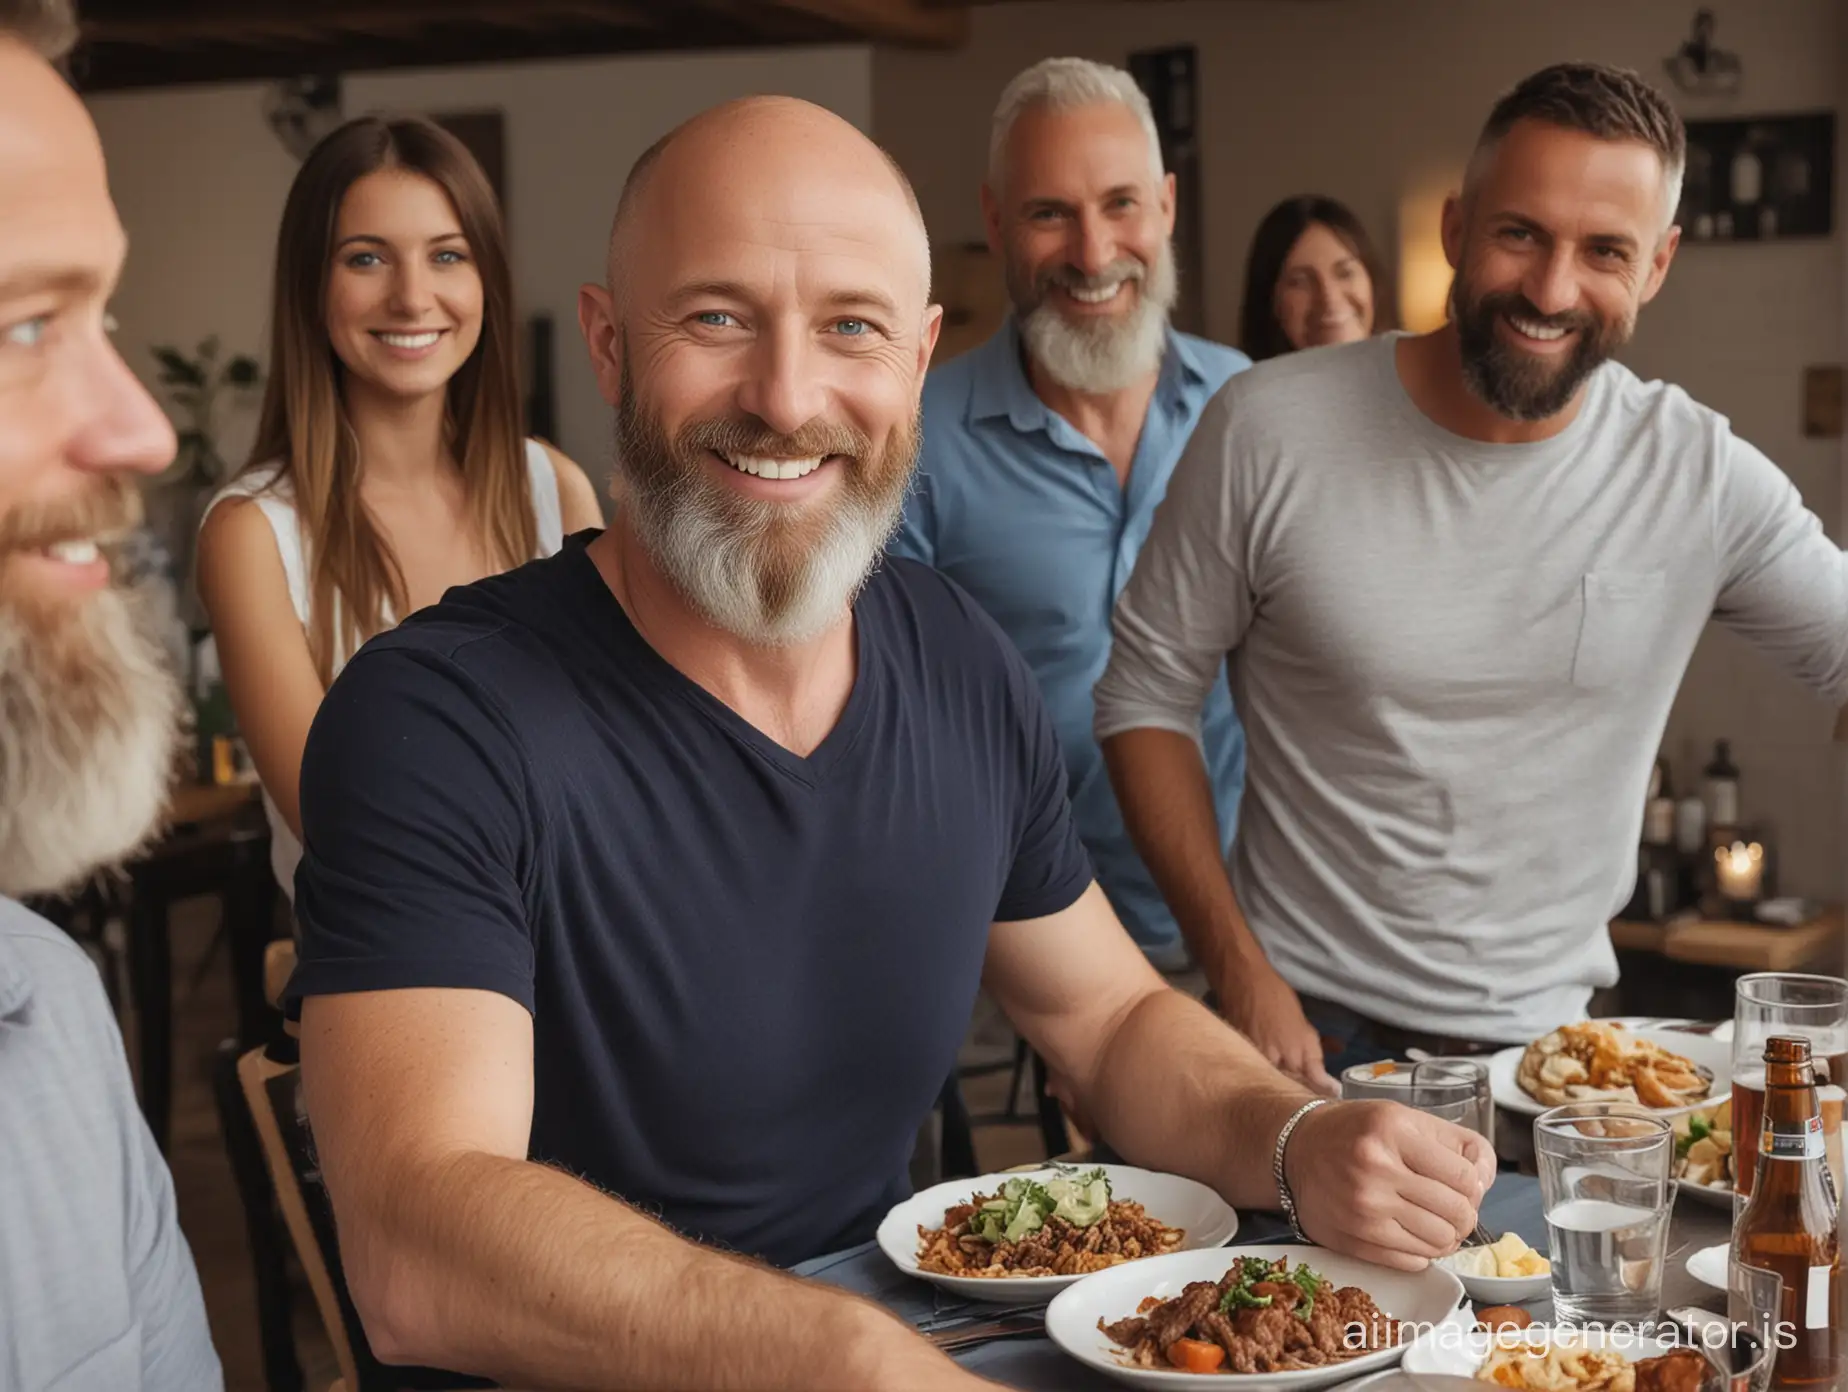 bald middle aged white man with long well kept brown beard smiling with blue eyes standing with friends having dinner